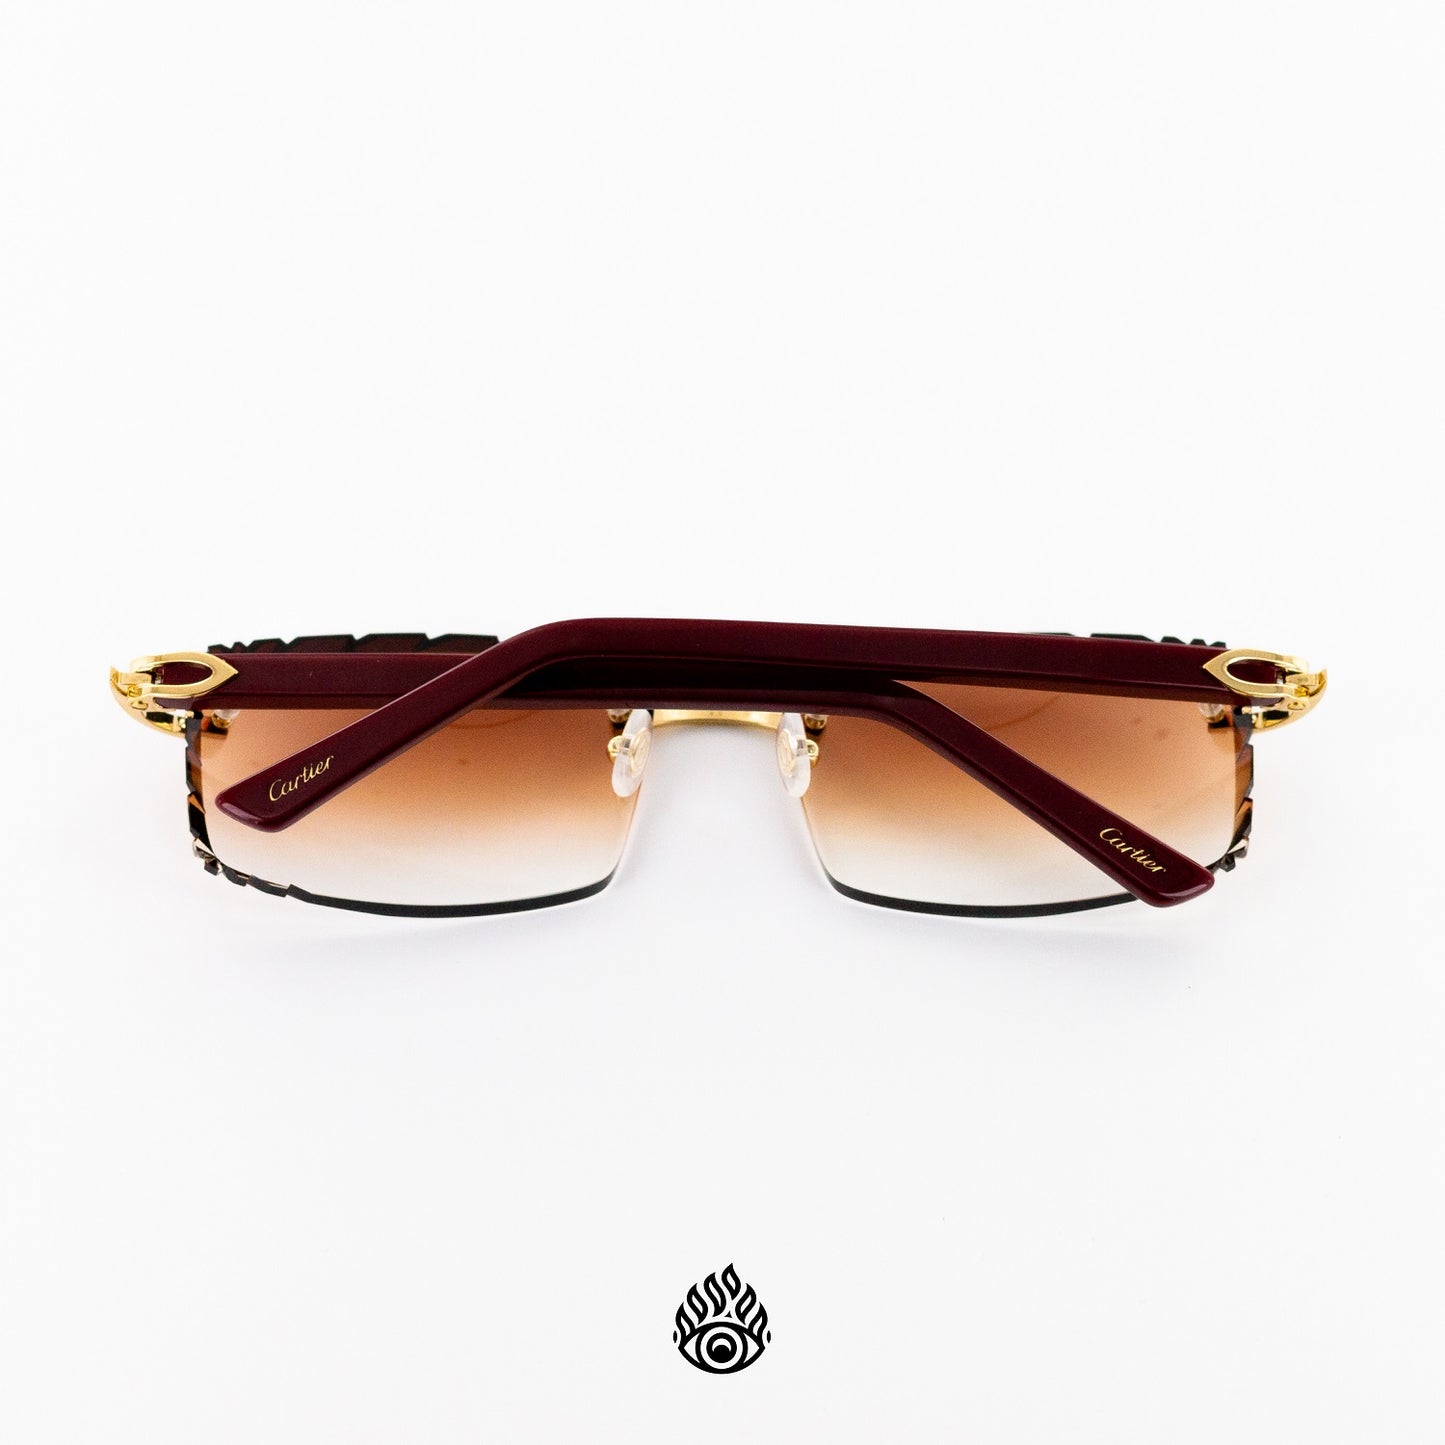 Cartier Red Acetate Glasses with Gold C Decor & Honey Brown Lens